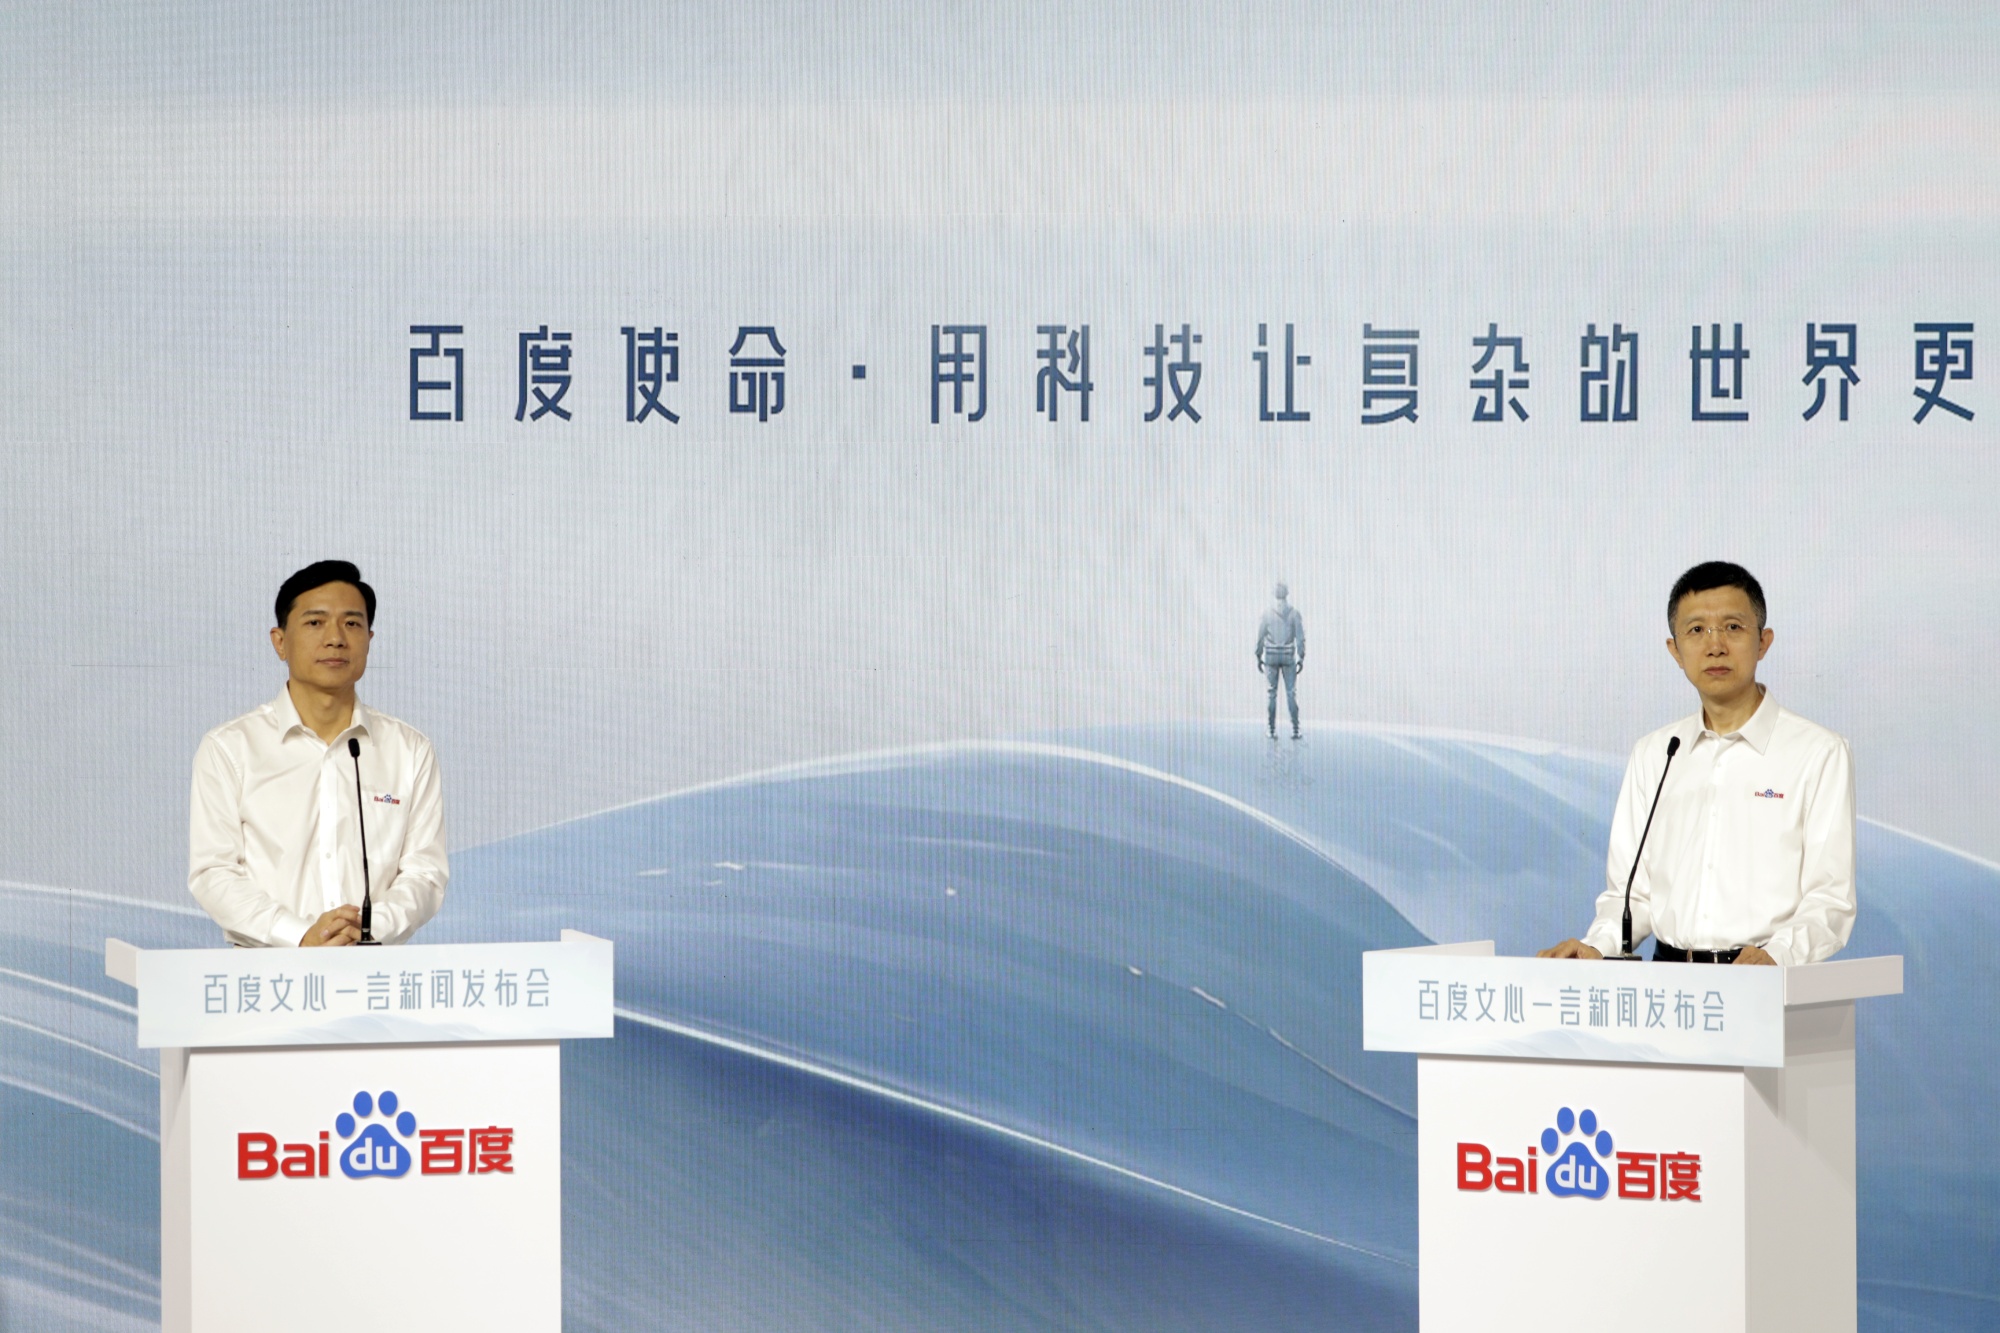 INTERNET: Baidu Removes Millions of Ads, Shutters Travel Site